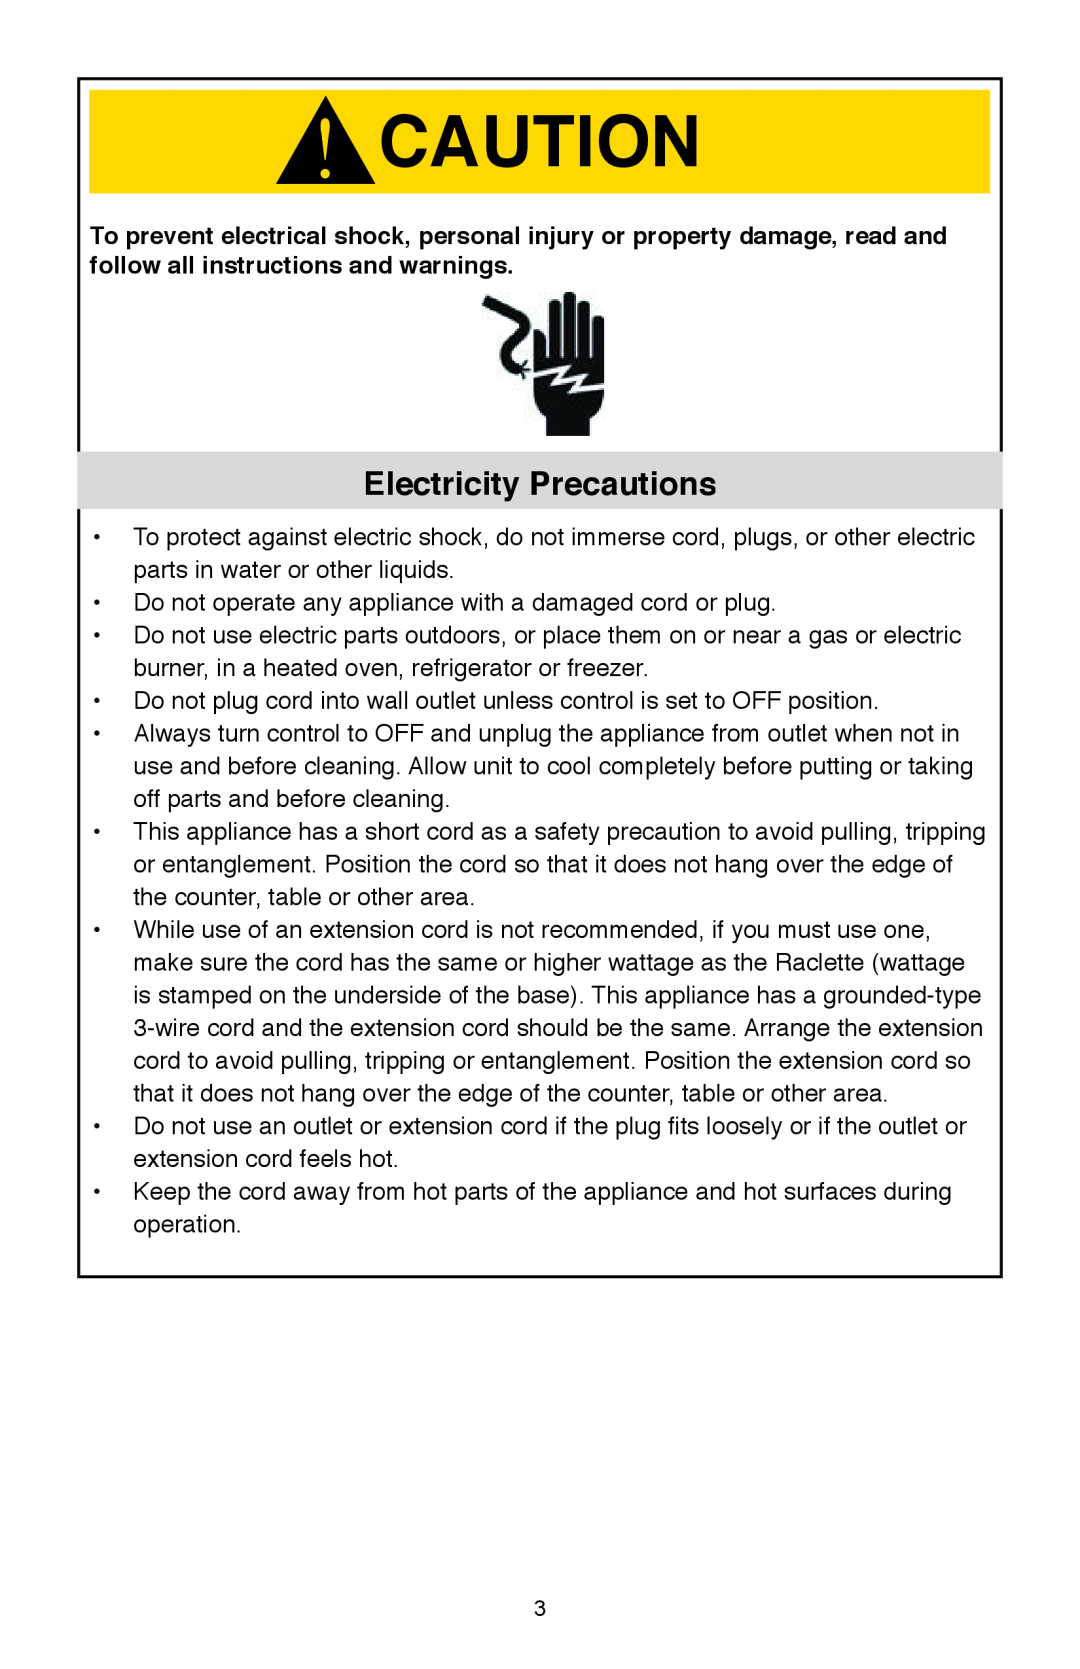 West Bend Model 6130 instruction manual Electricity Precautions 